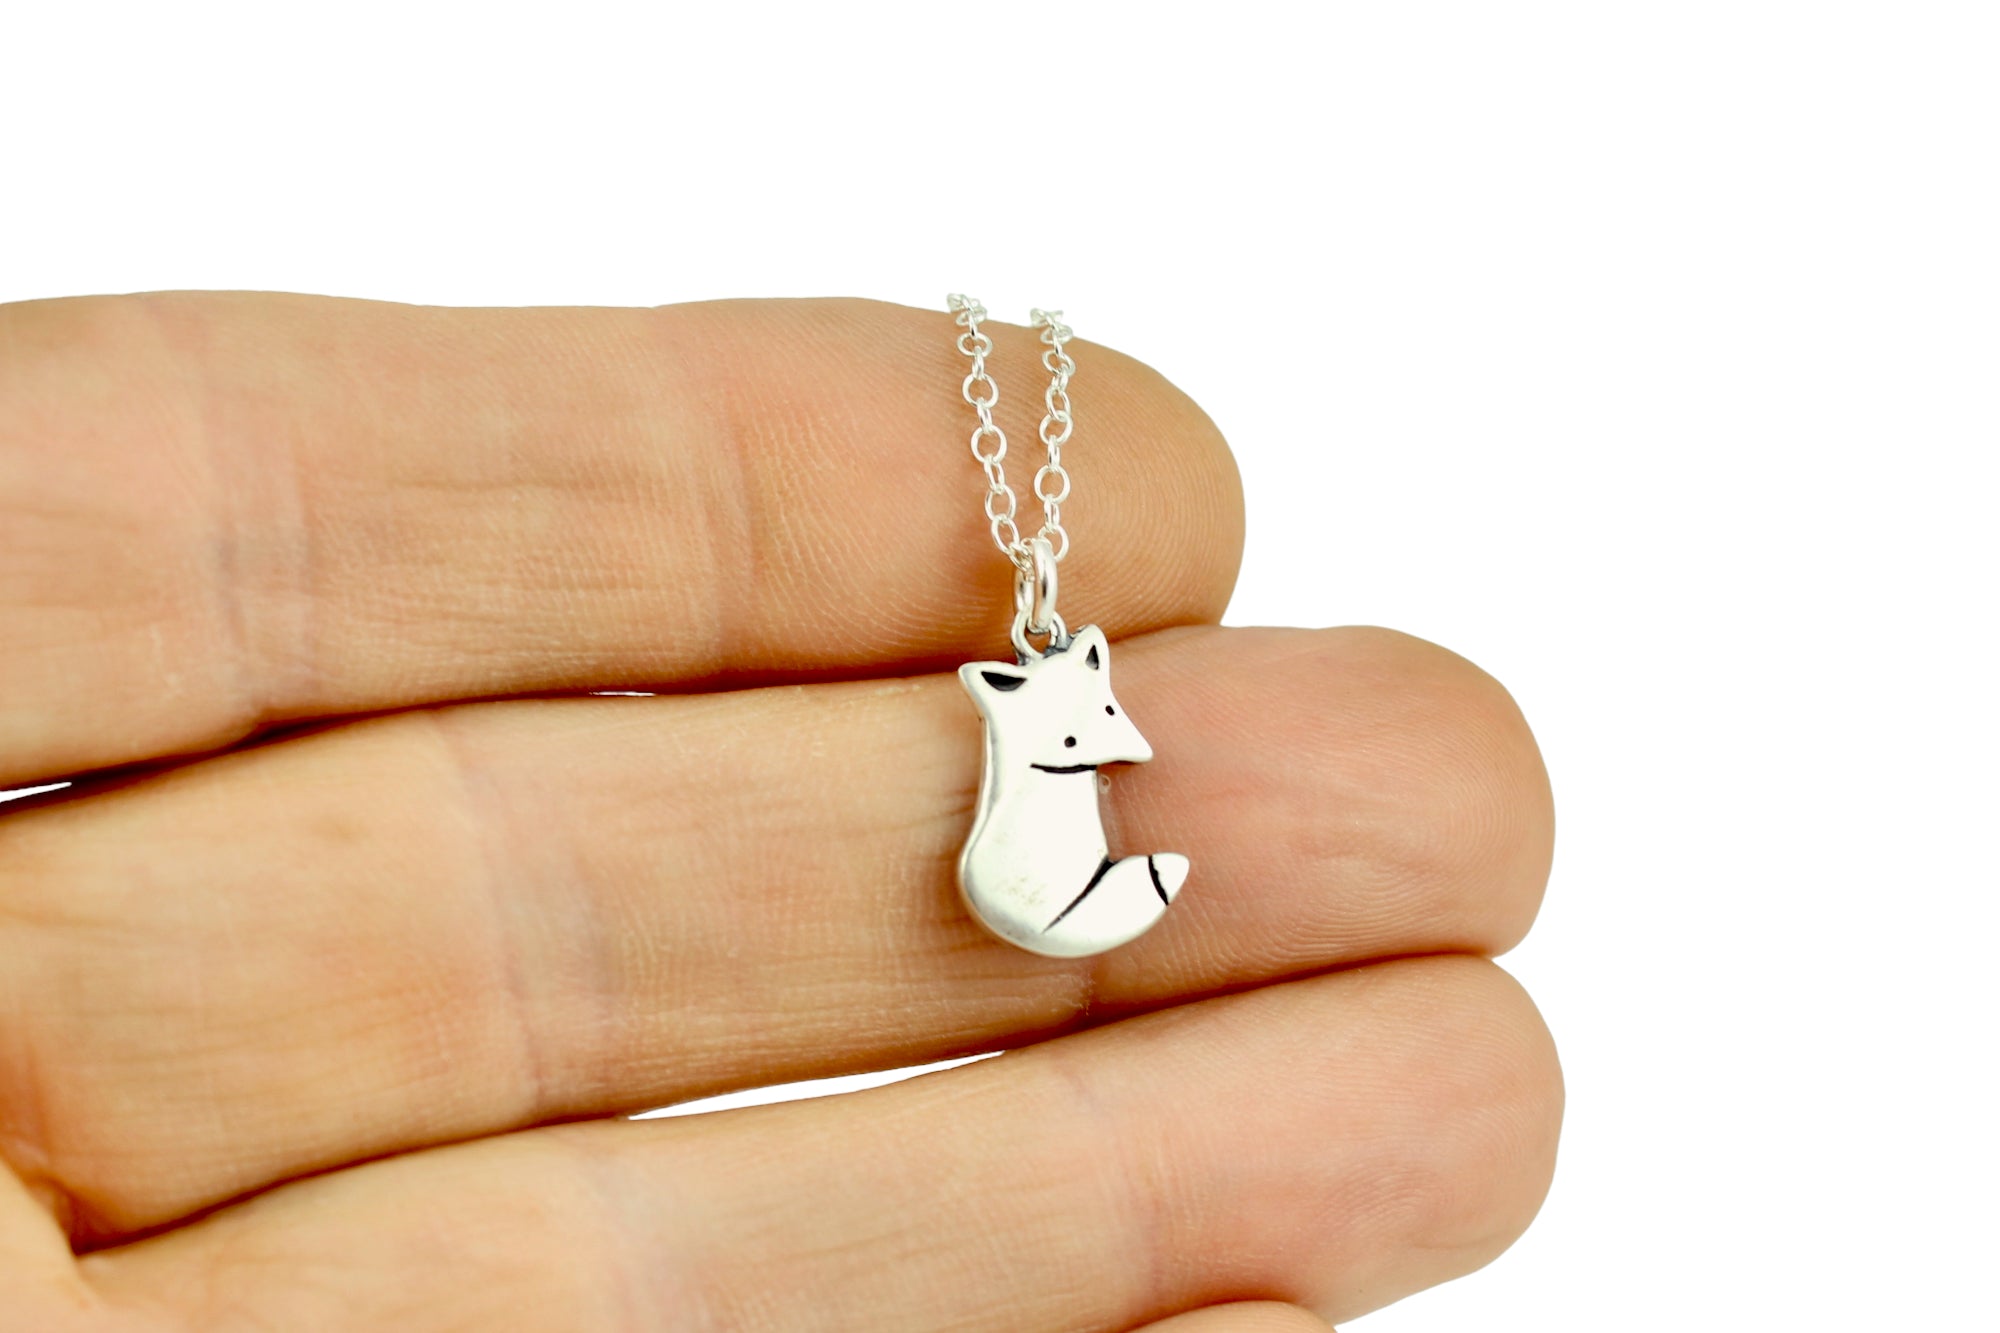 Fox Necklace With Name in Sterling Silver Metal, Name Necklace, Fox  Jewelry, Fox Pendant, Fox Lovers Gift, Gift for Mom, Birthday Gift - Etsy |  Fox jewelry, Foxes necklace, Fox pendant